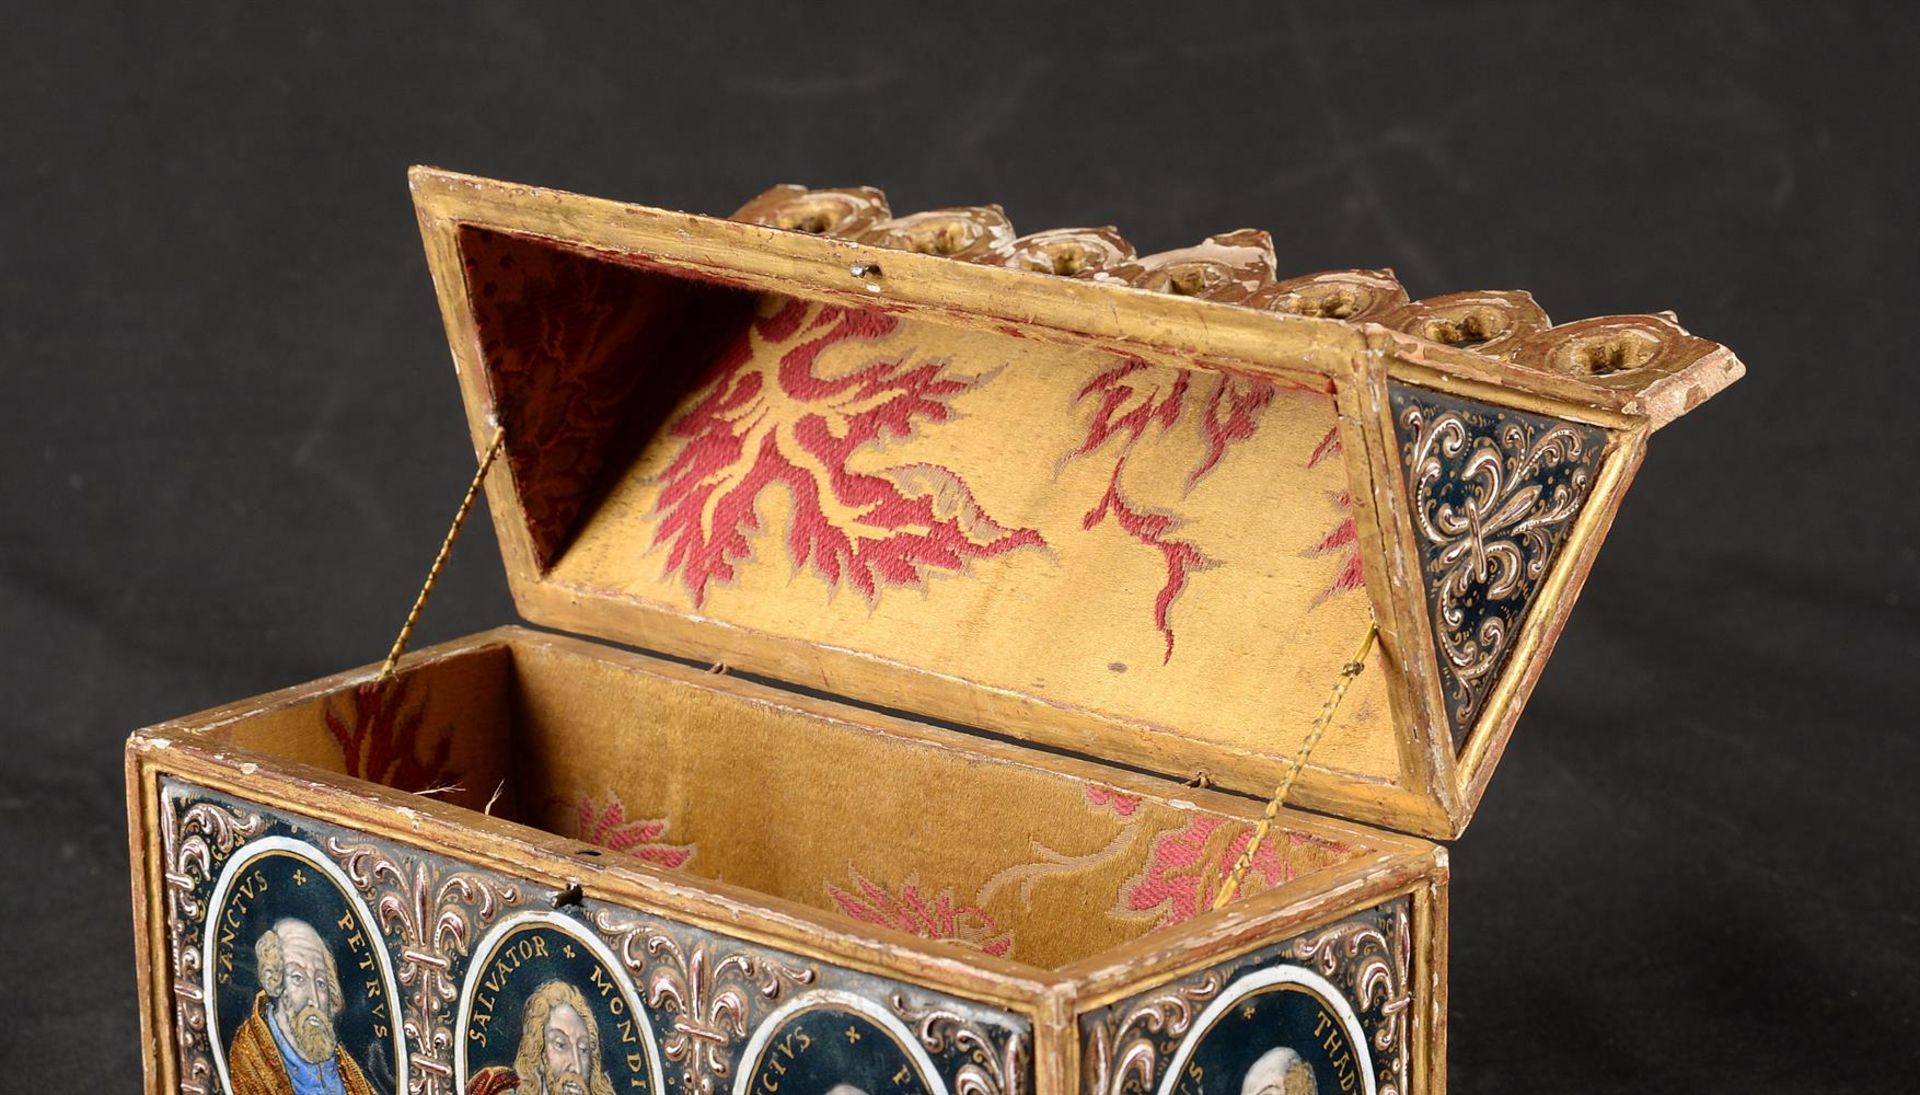 A GILTWOOD AND ENAMEL SET CHASSE OR CASKET, IN THE 16TH CENTURY LIMOGES MANNER - Image 8 of 8